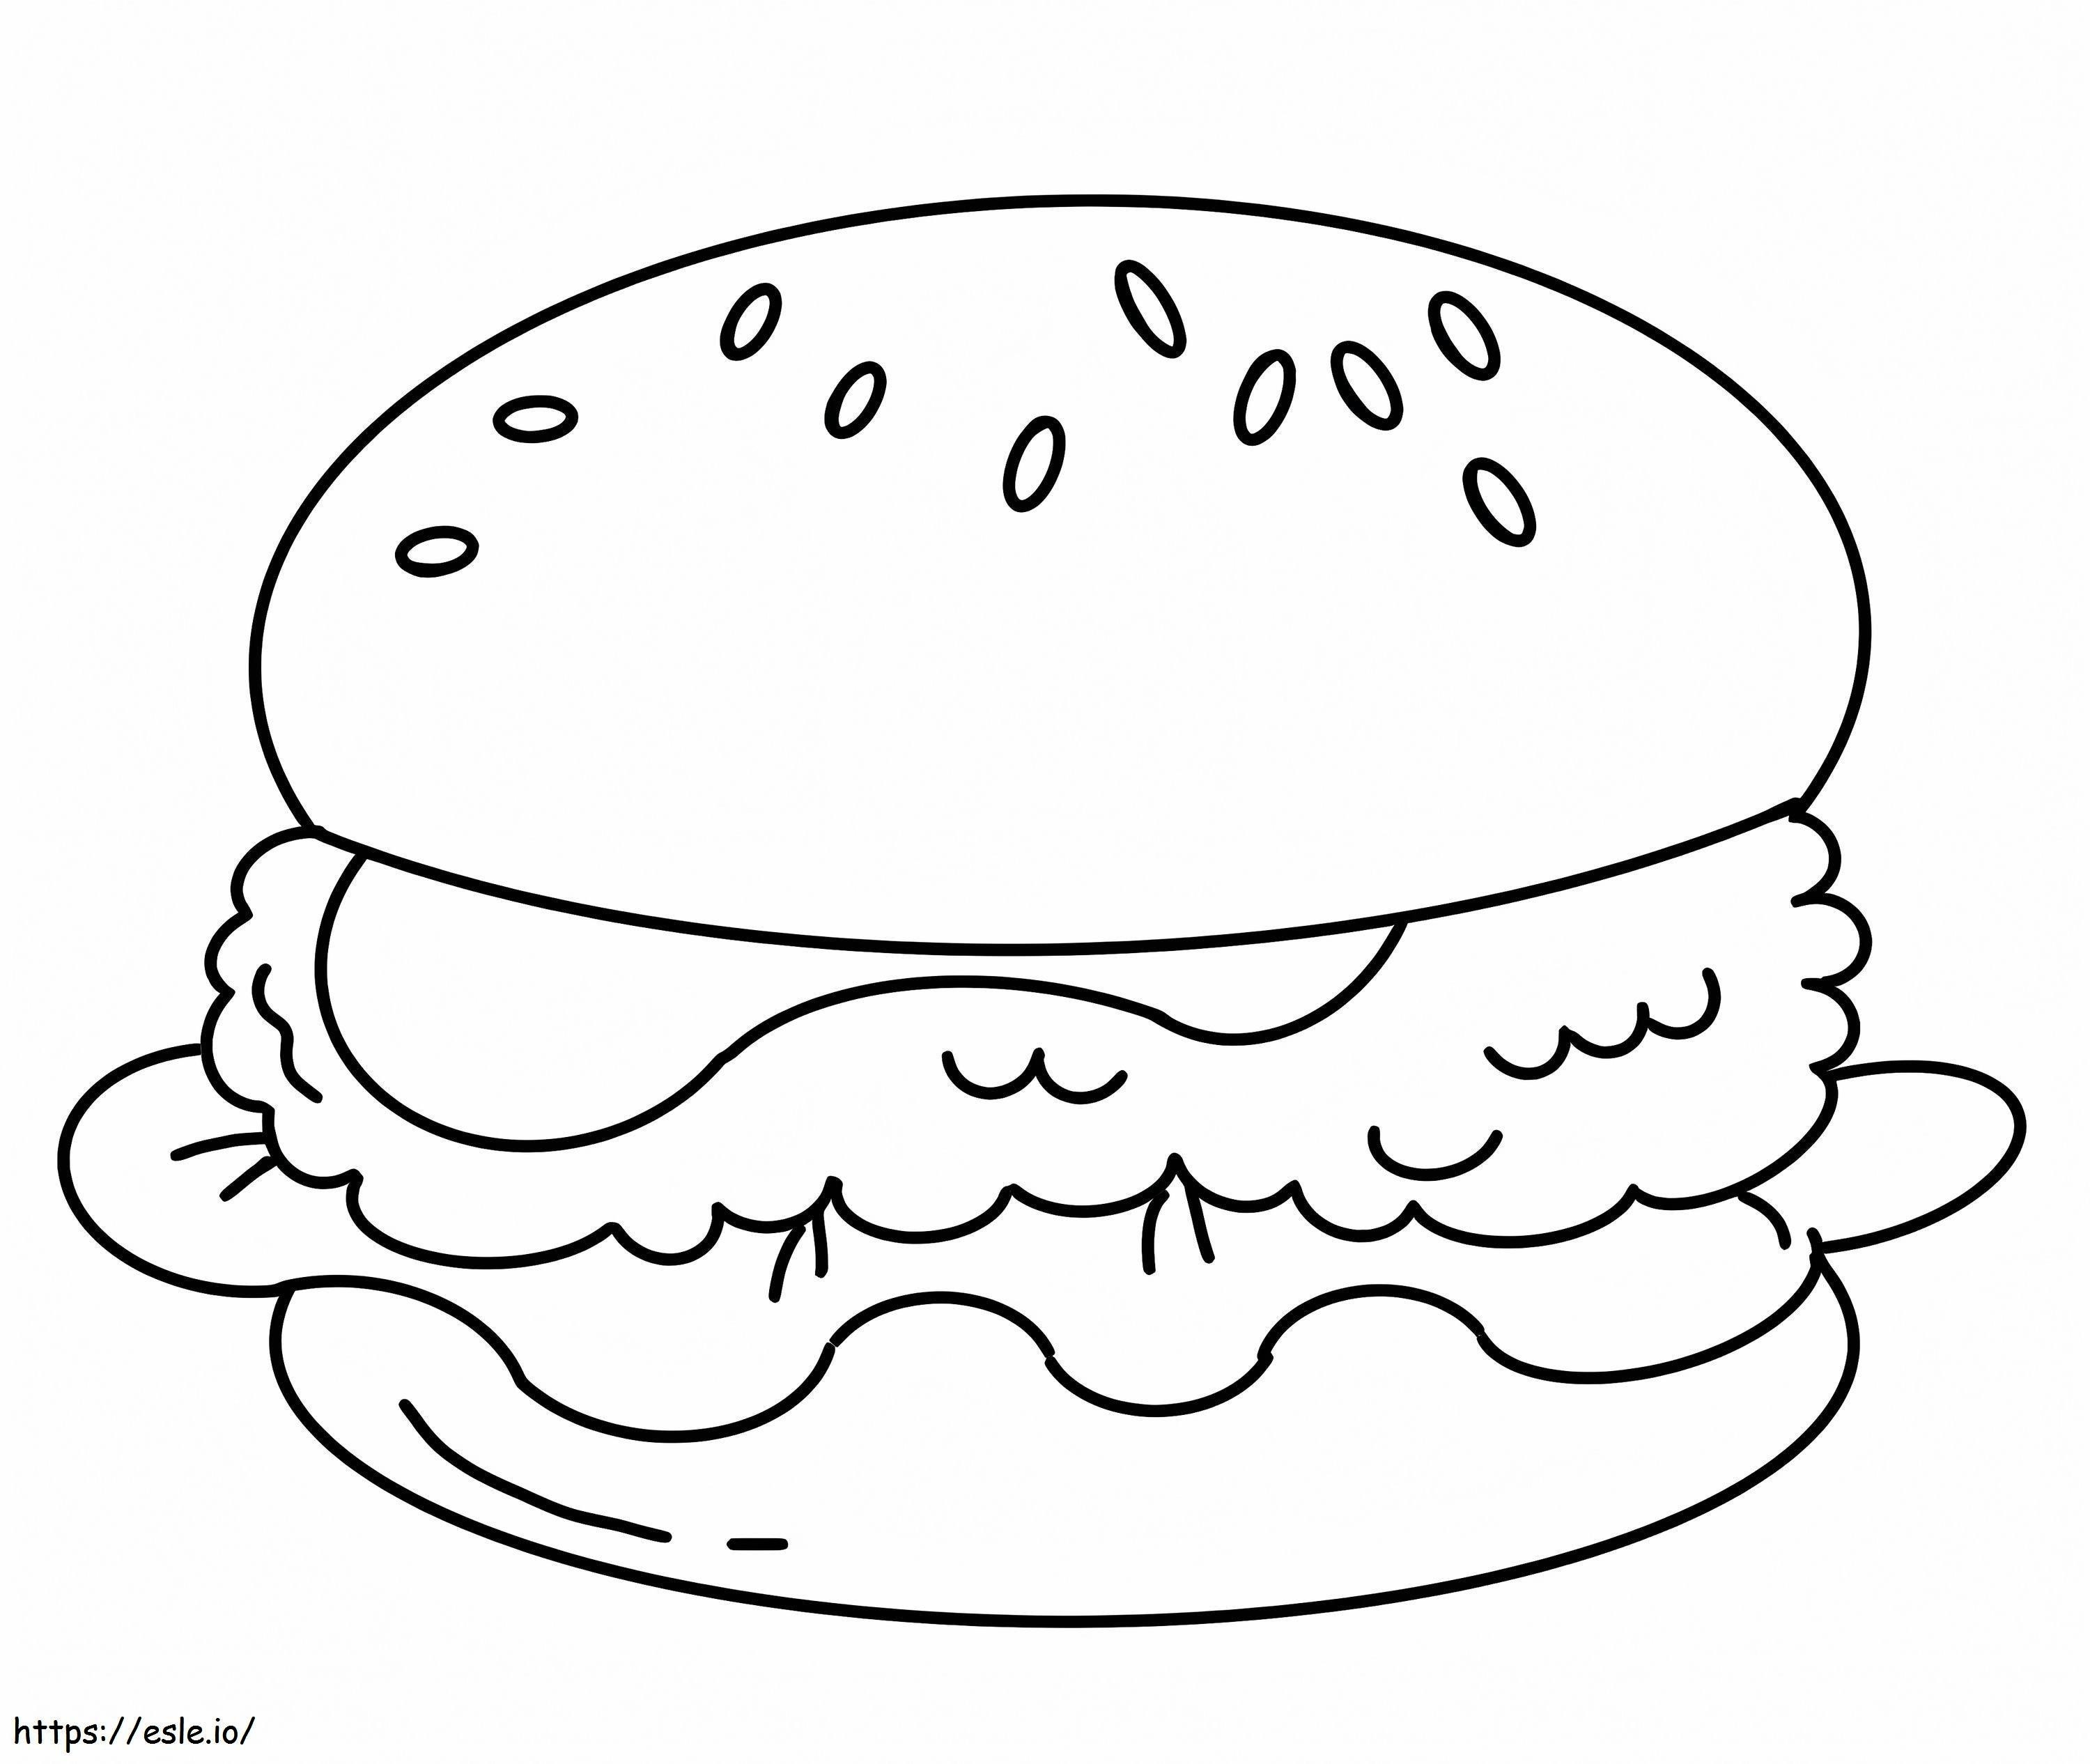 Simple Burger coloring page